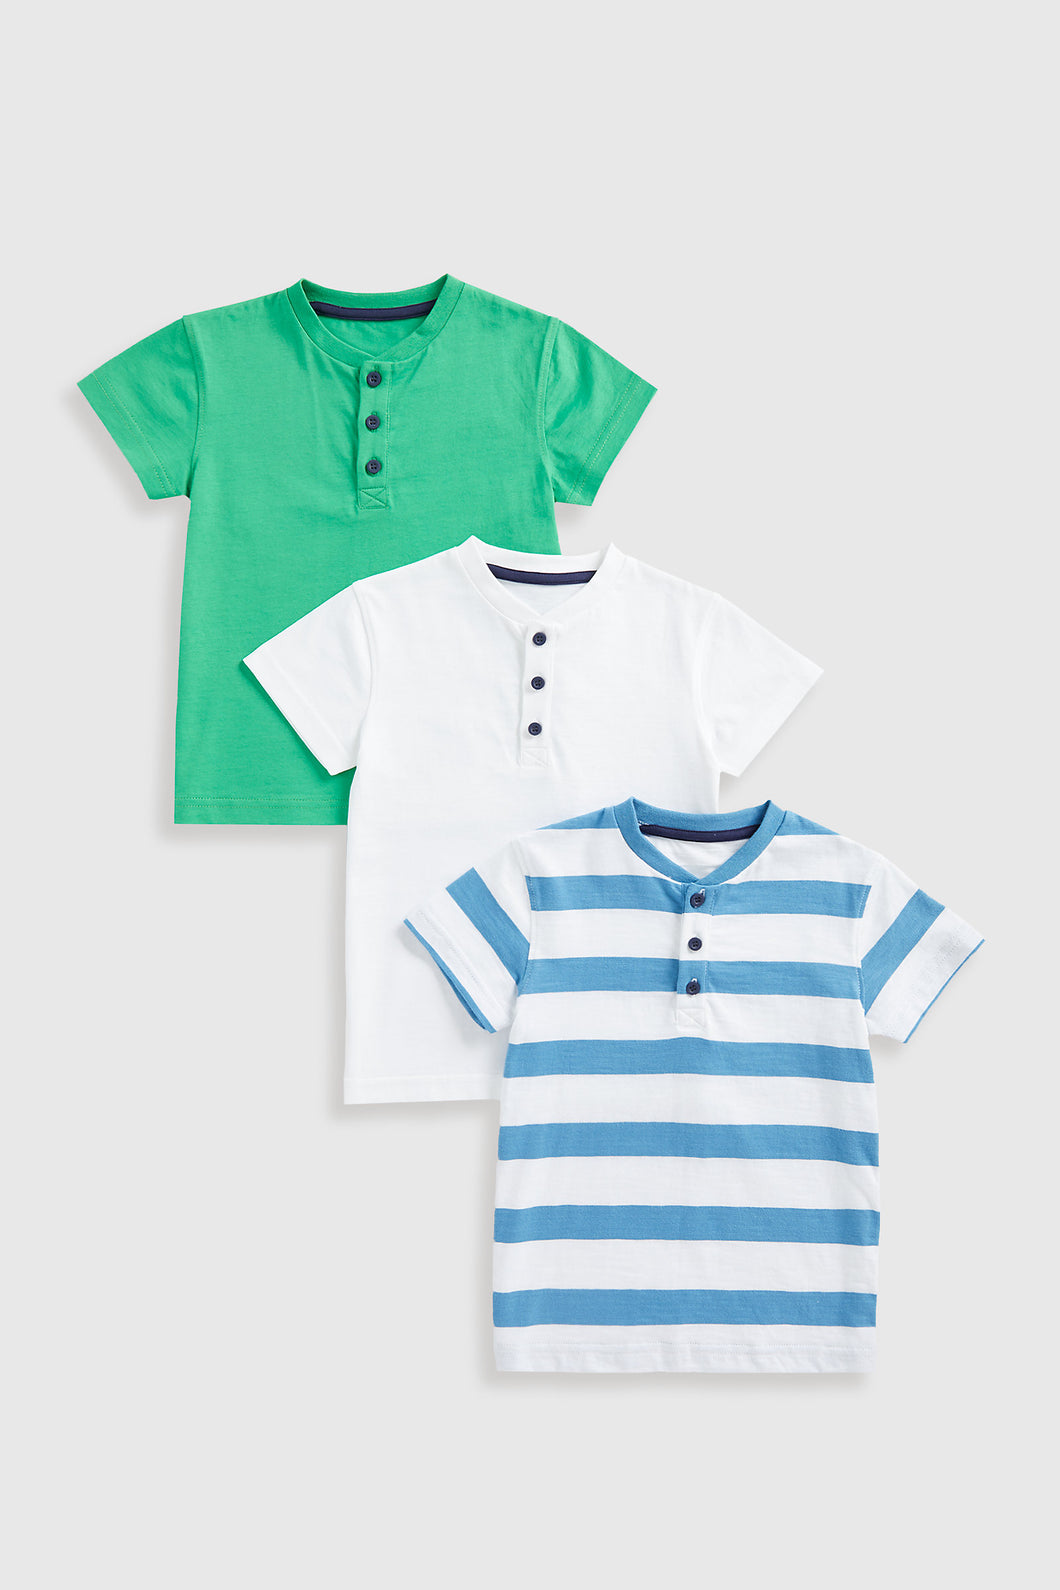 Mothercare Henley T-Shirts - 3 Pack